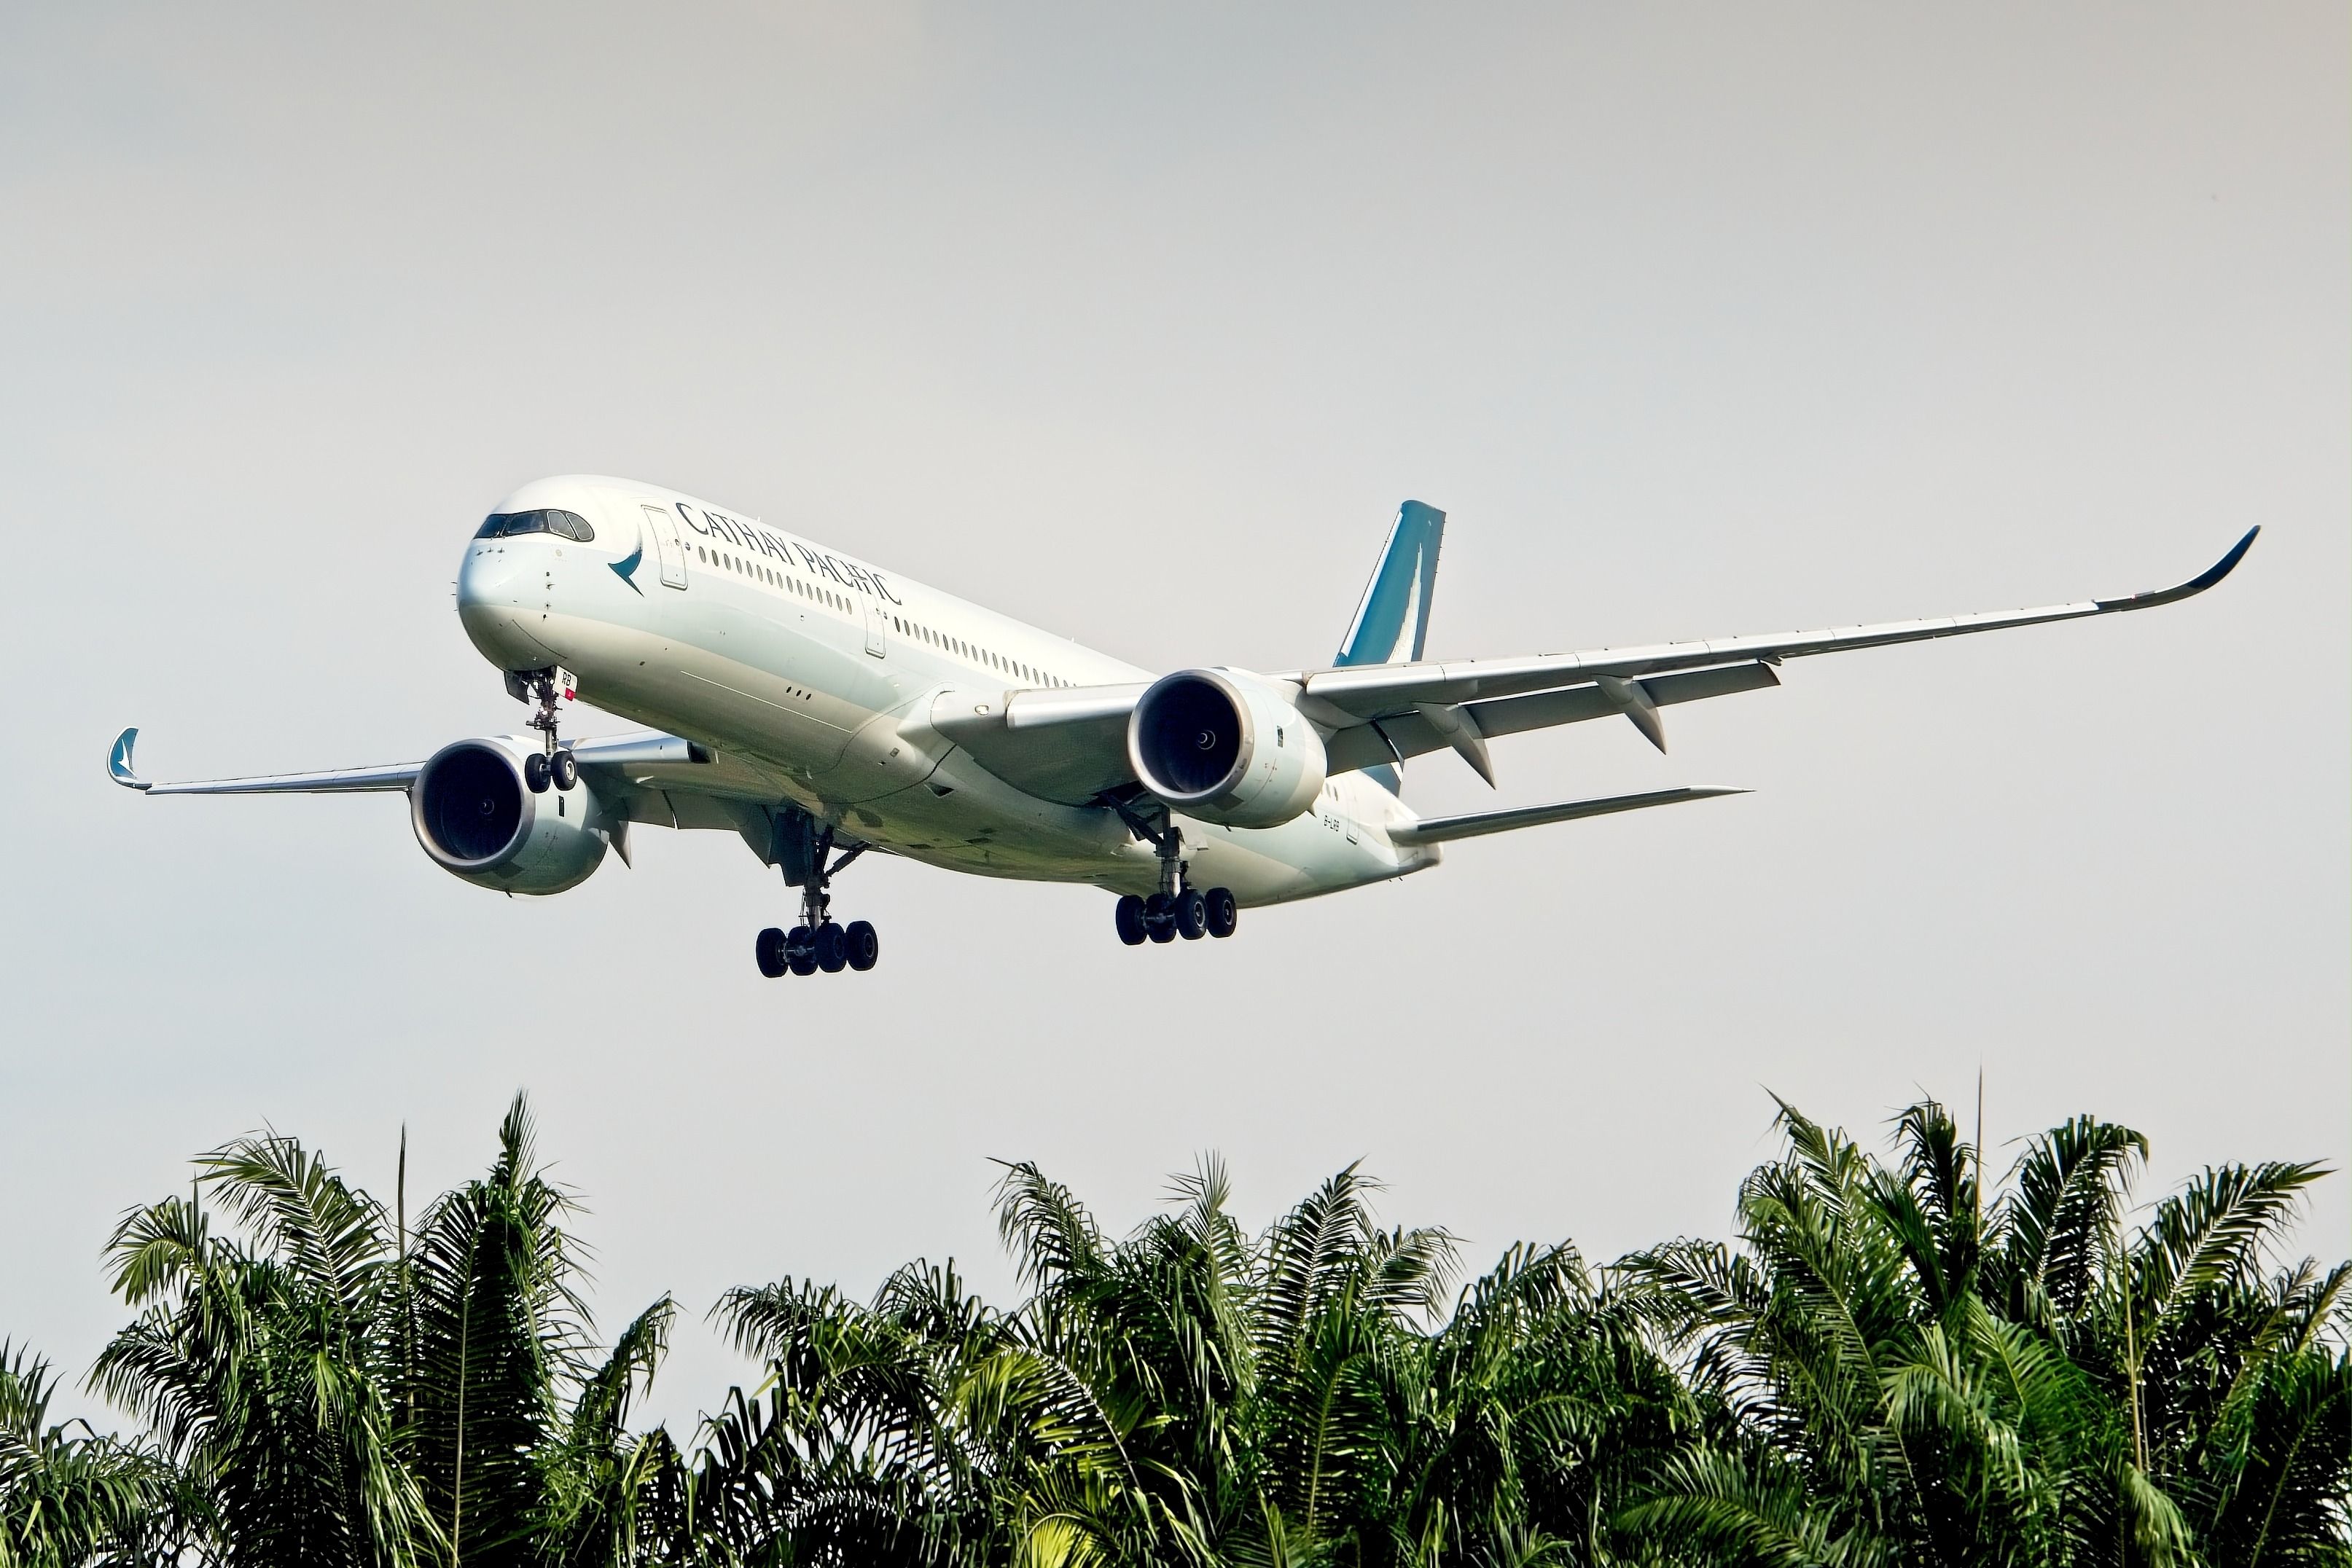 A Cathay Pacific Airbus A350 landing